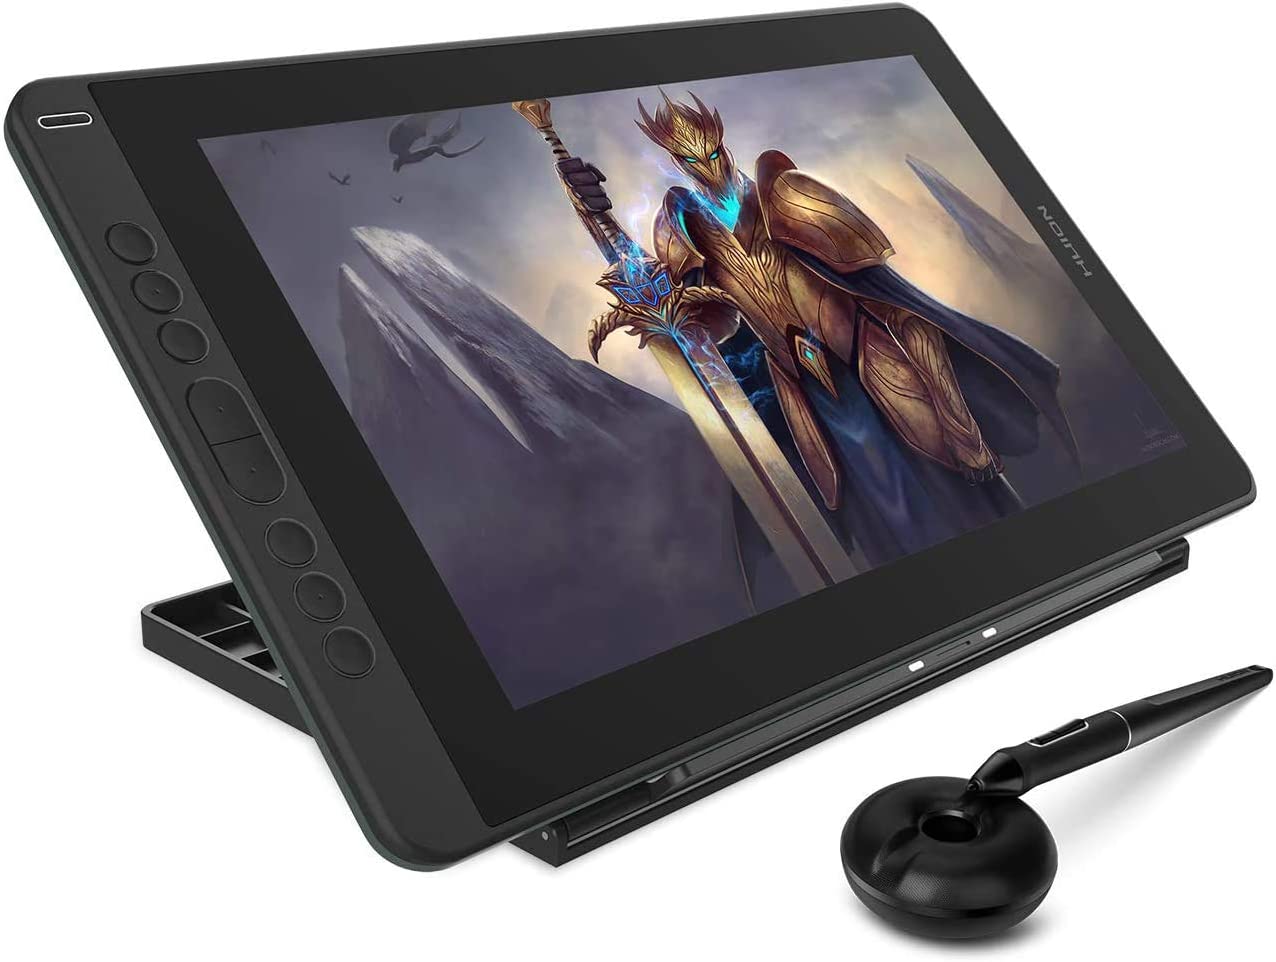 2020 HUION Kamvas 13 Graphics Drawing Tablet with [...]